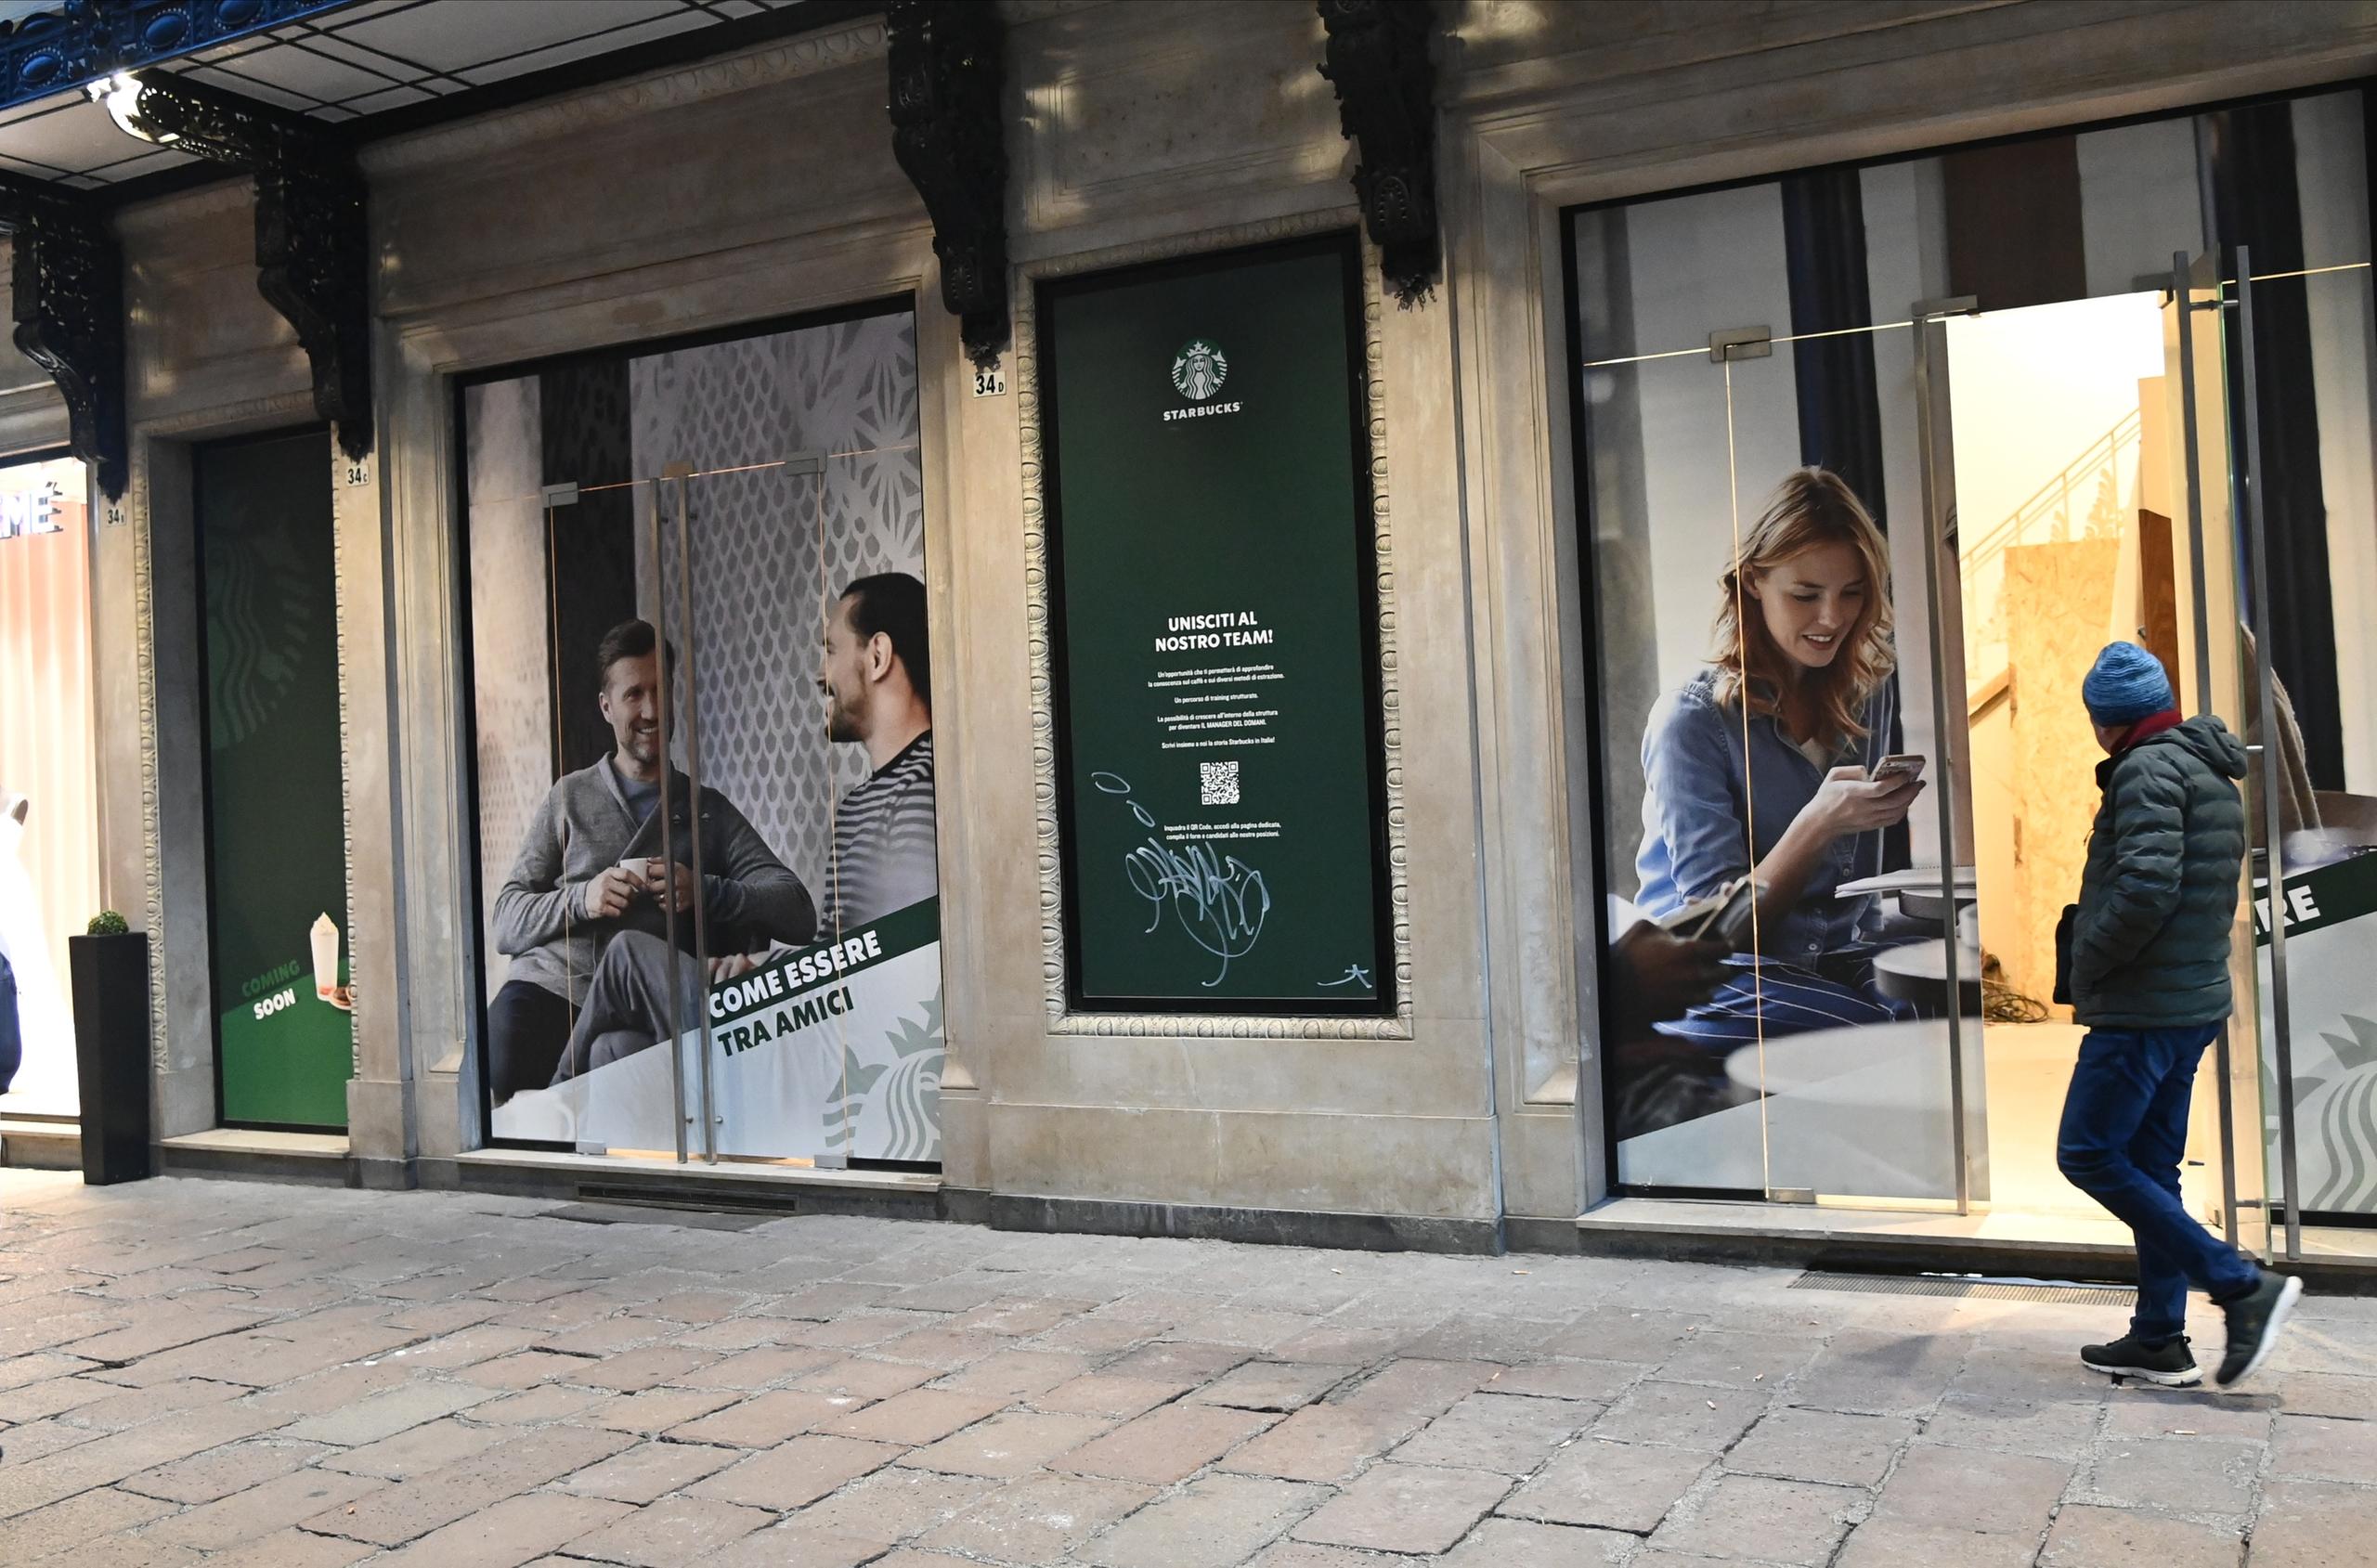 Starbucks in Bologna, there is an opening date